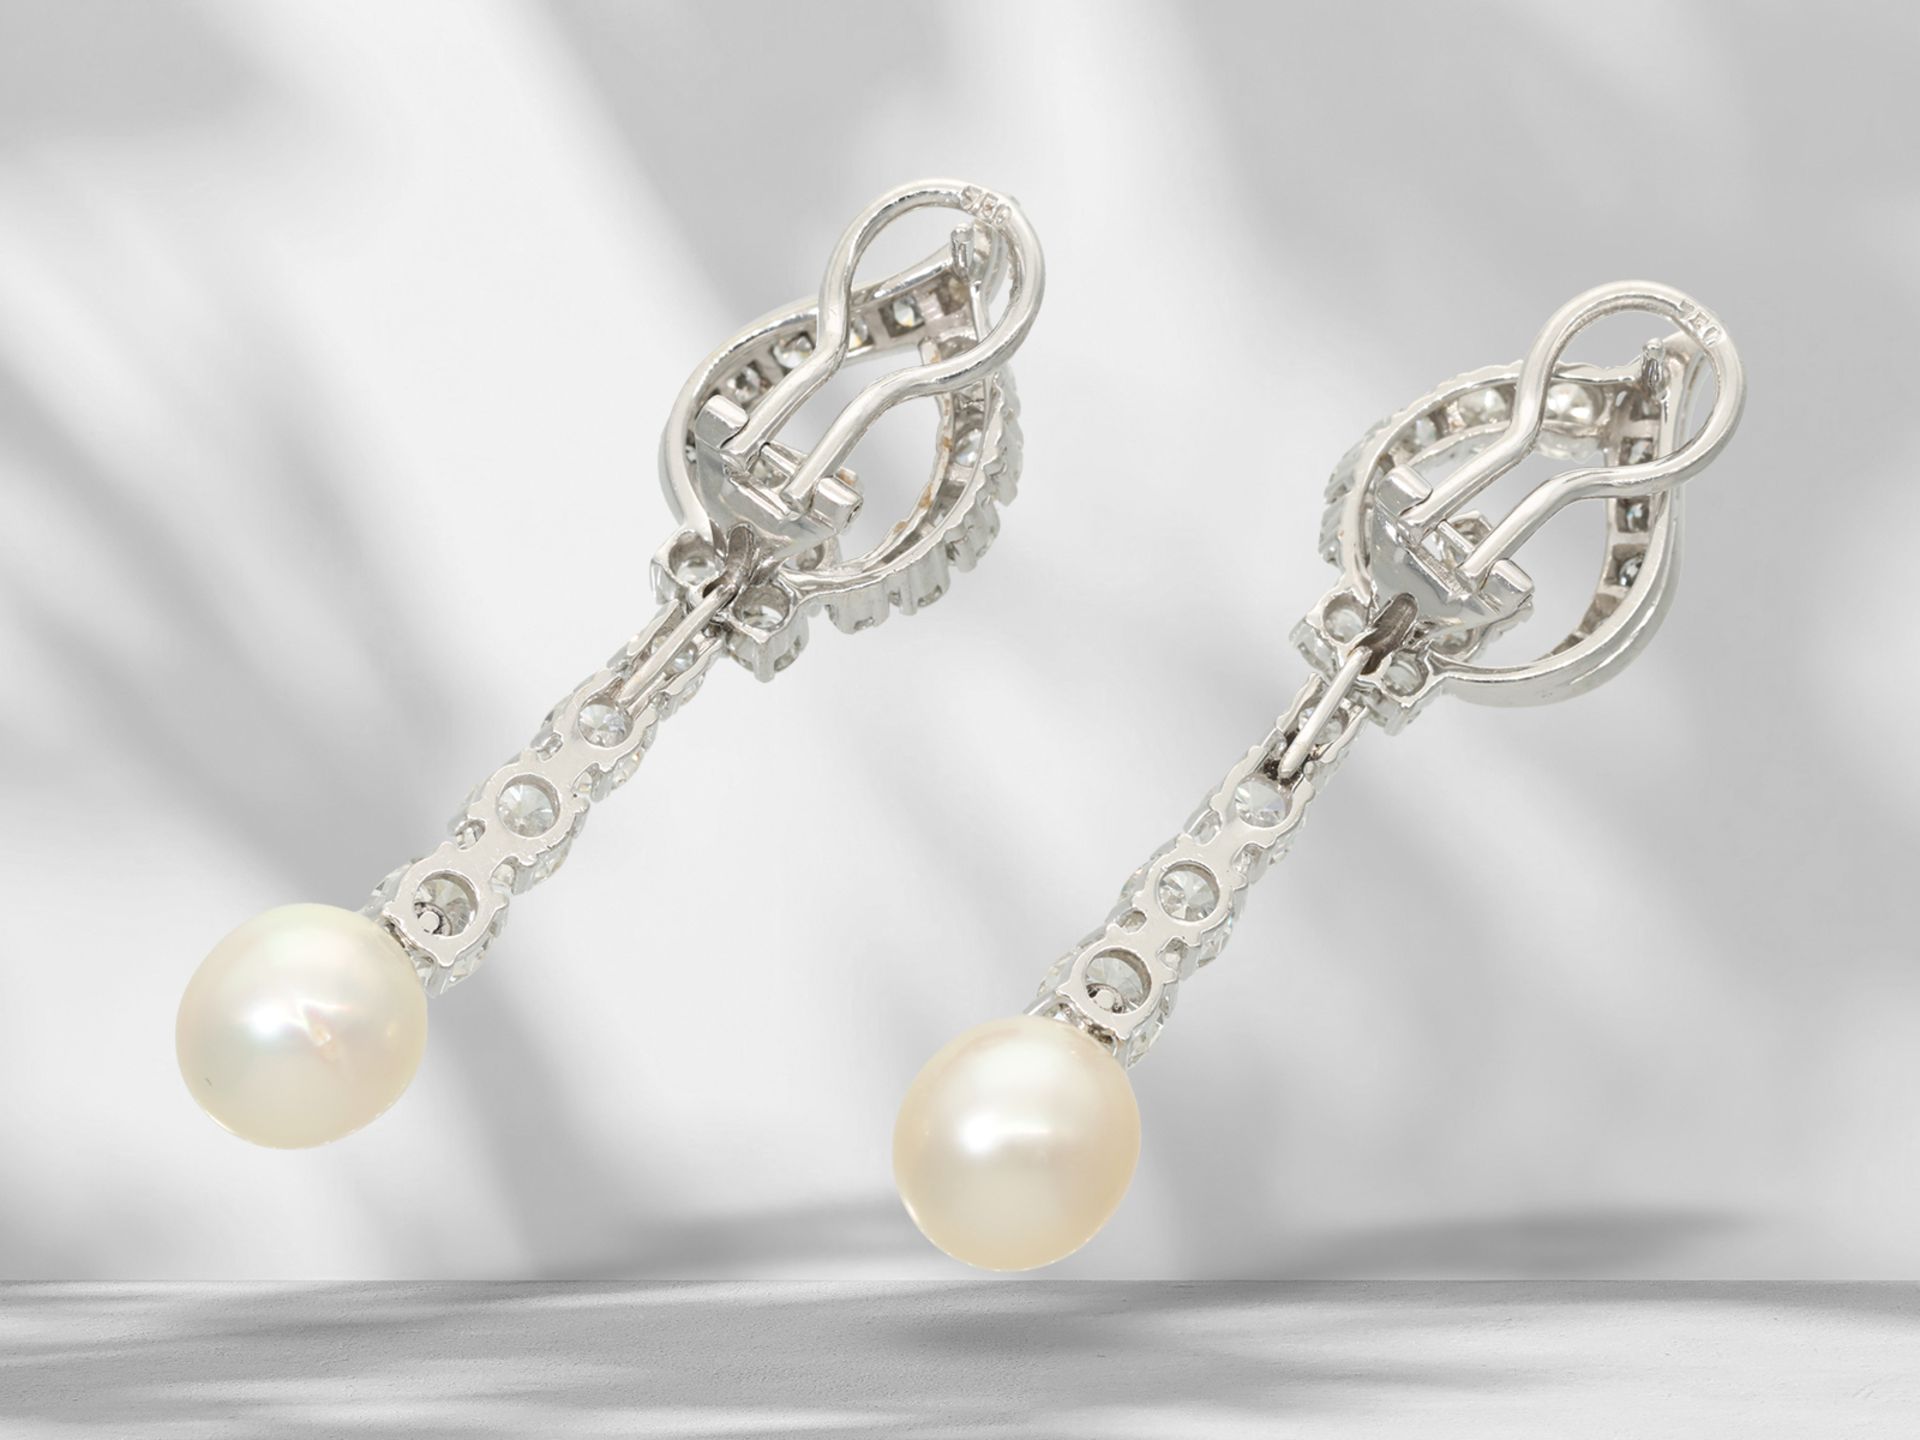 Earrings: extremely decorative, extravagant goldsmith's work with fine brilliant-cut diamonds and pe - Image 3 of 3